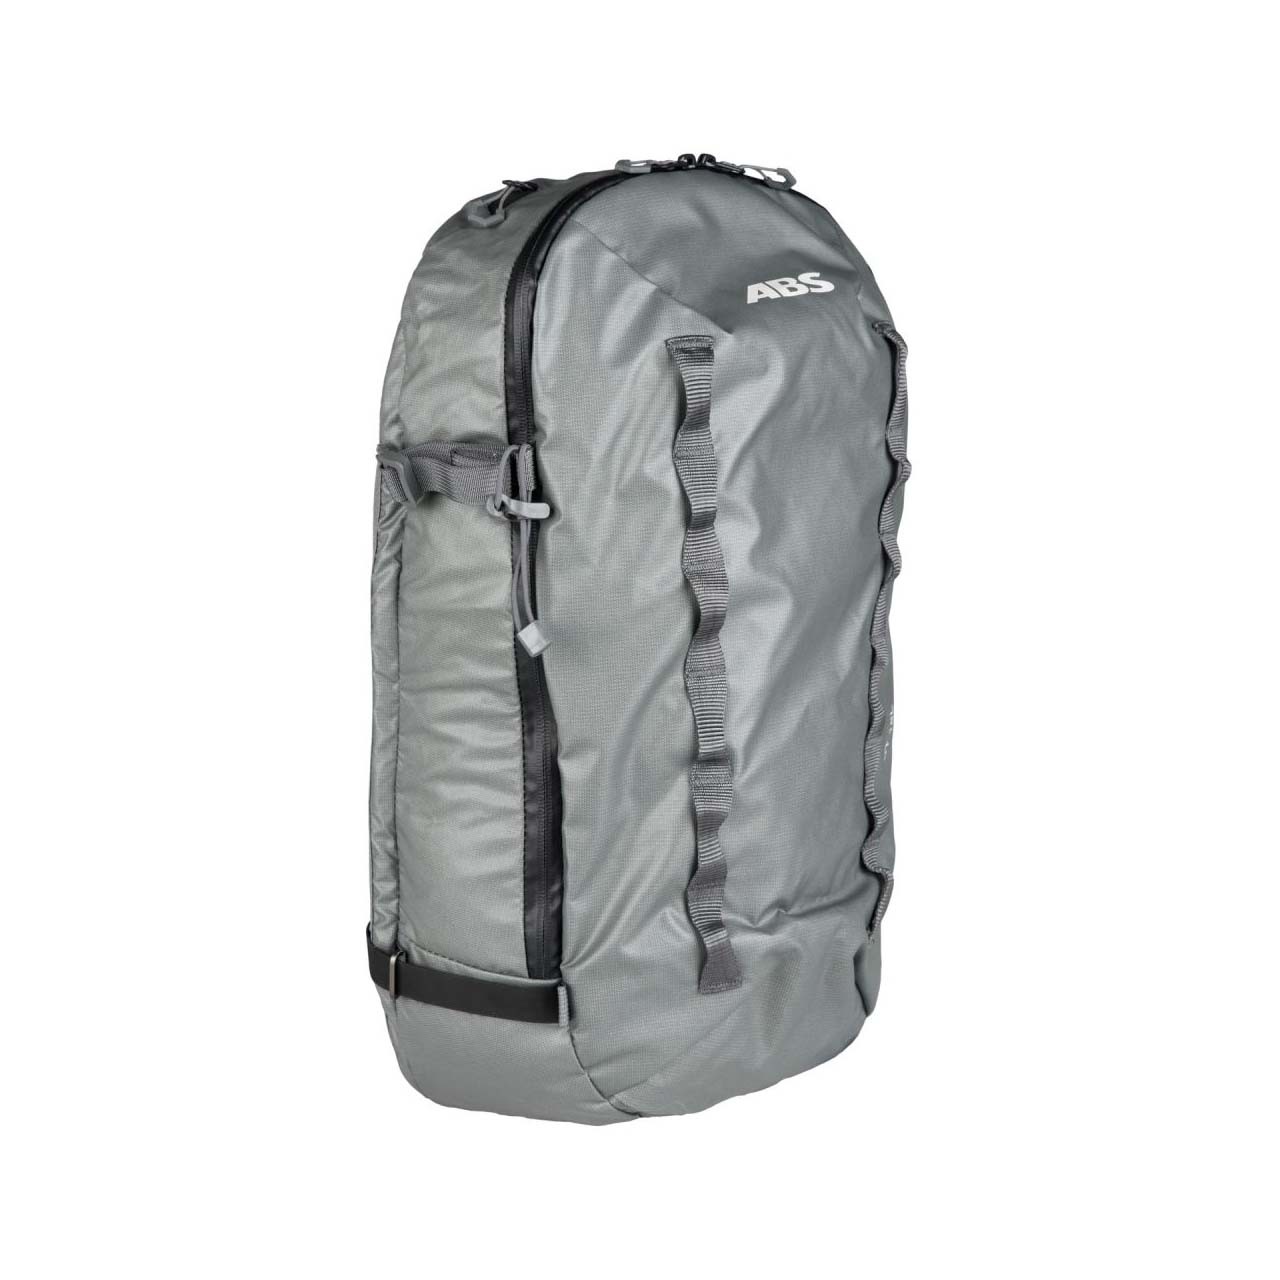 ABS P.RIDE Compact Zip-on 18 Liter - Mountain Grey